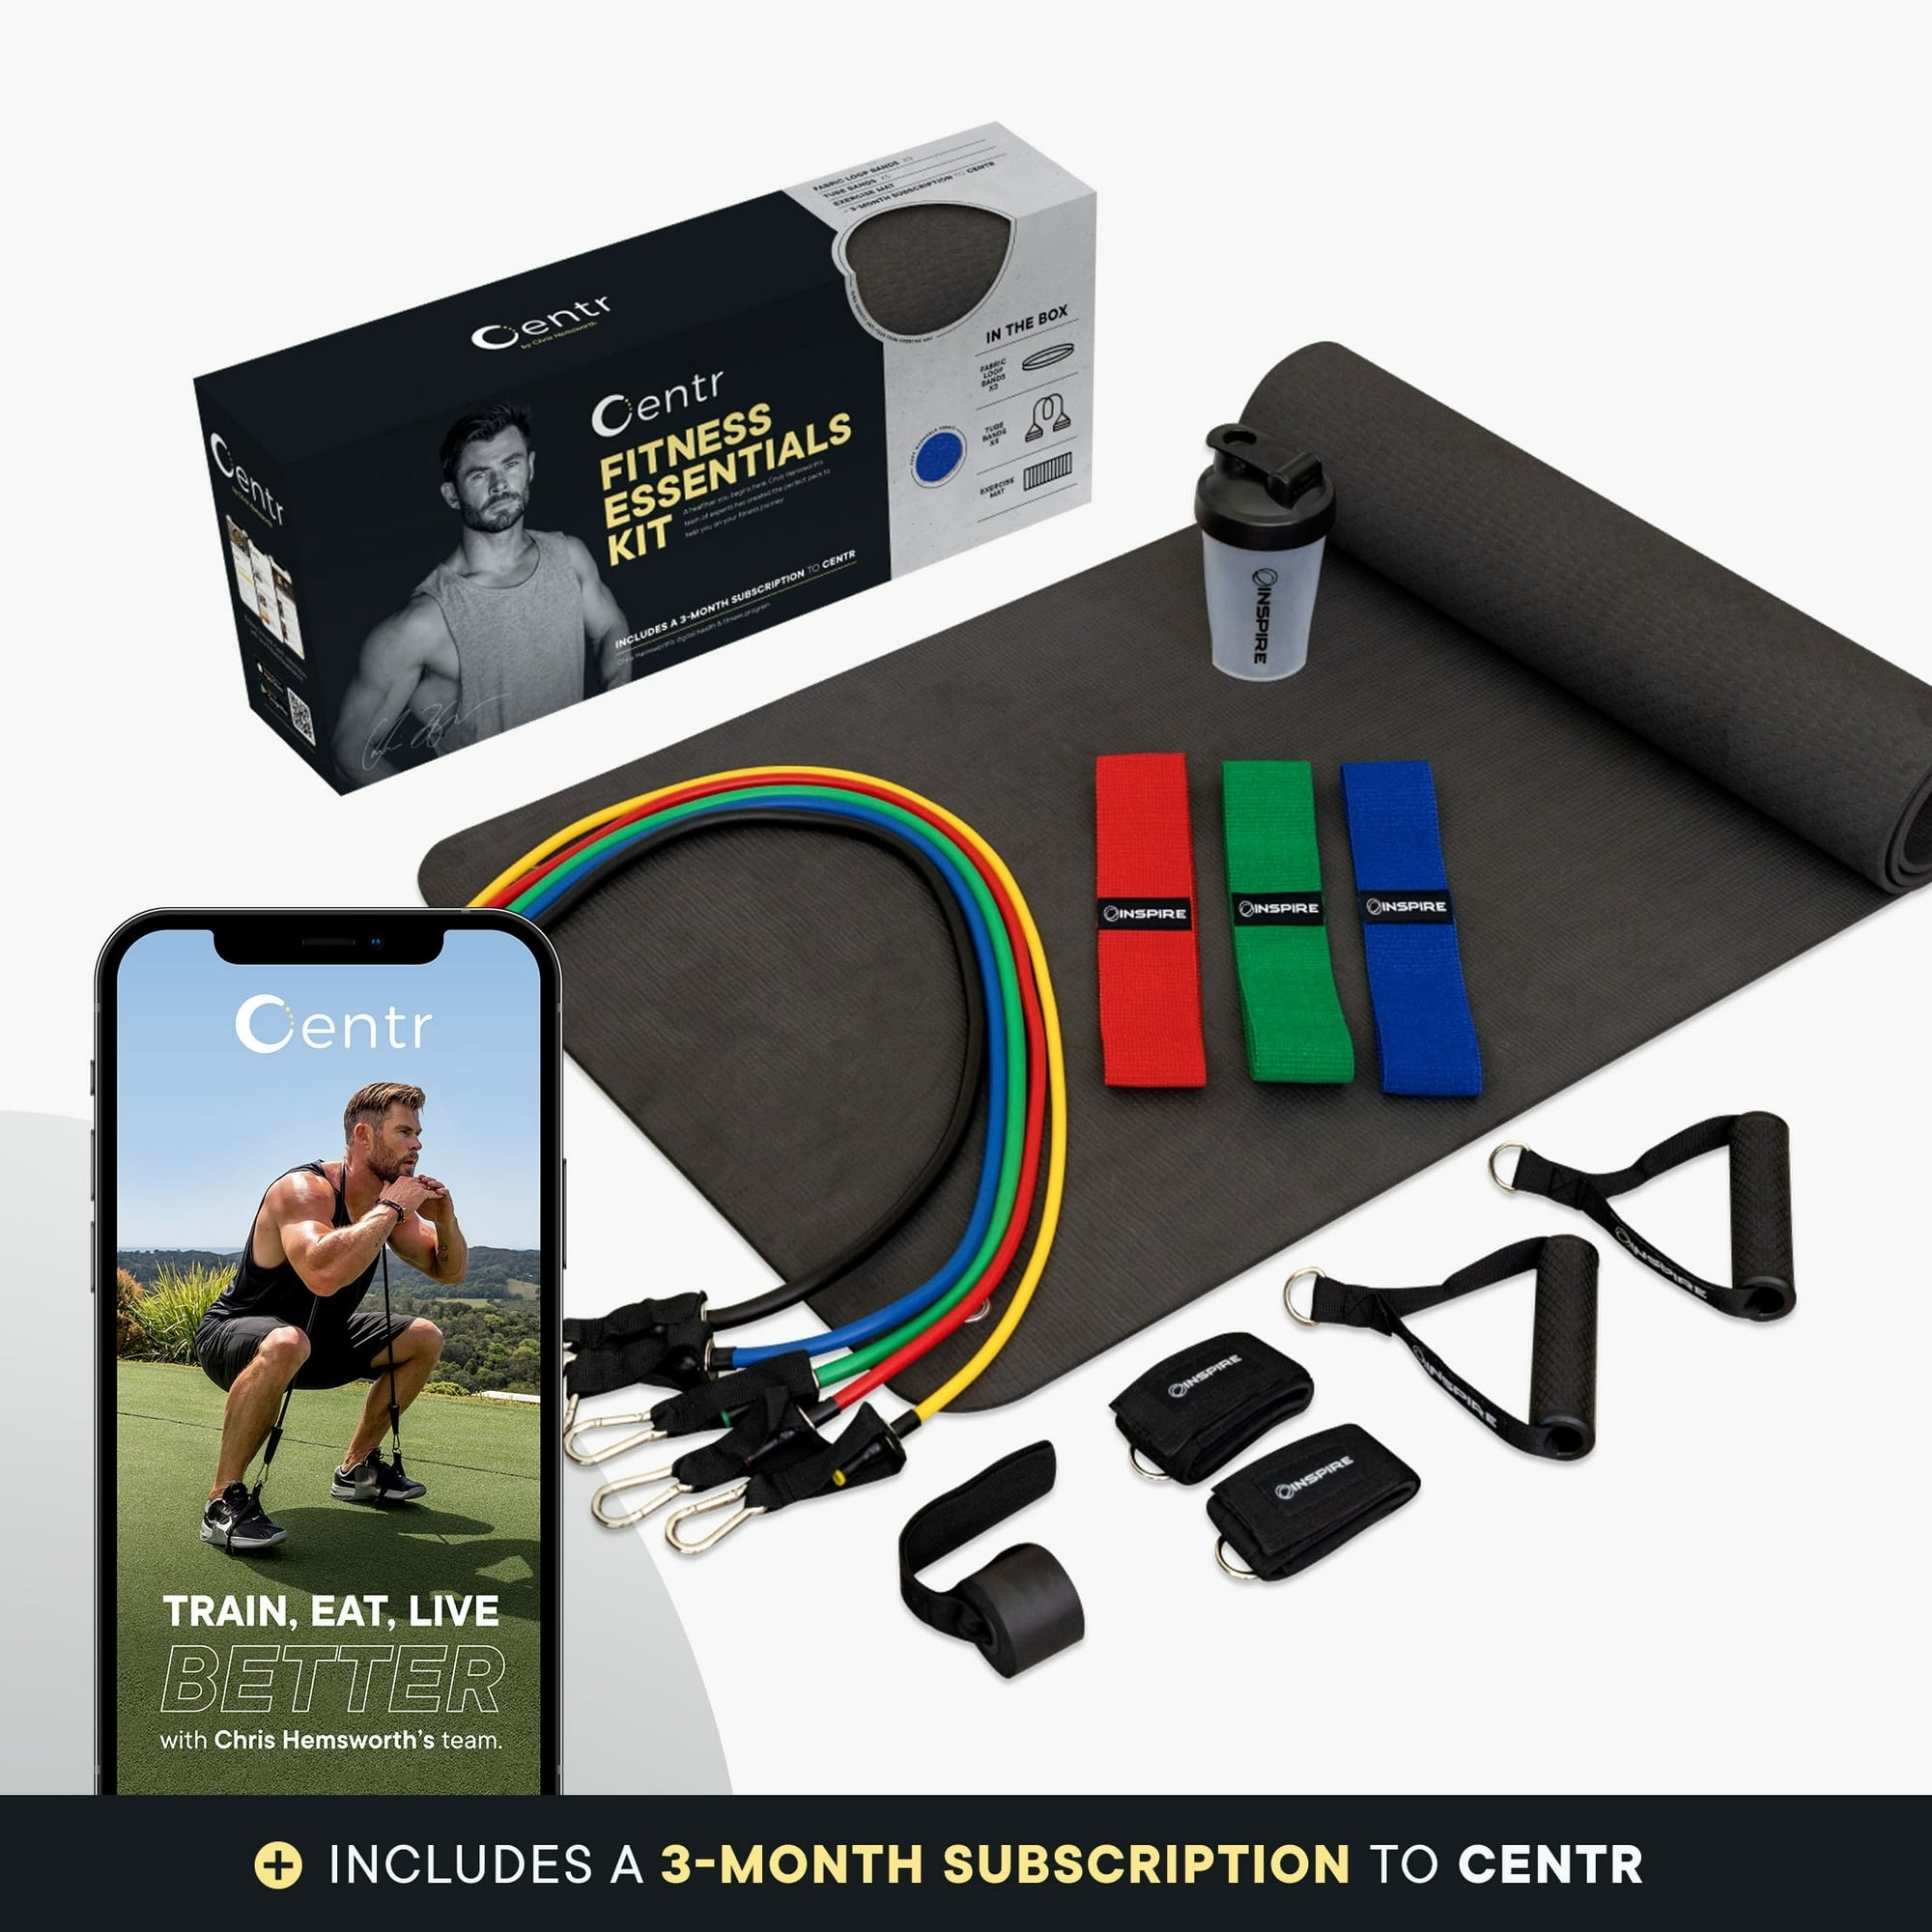 Workout mat, bands, and other fitness equipment.